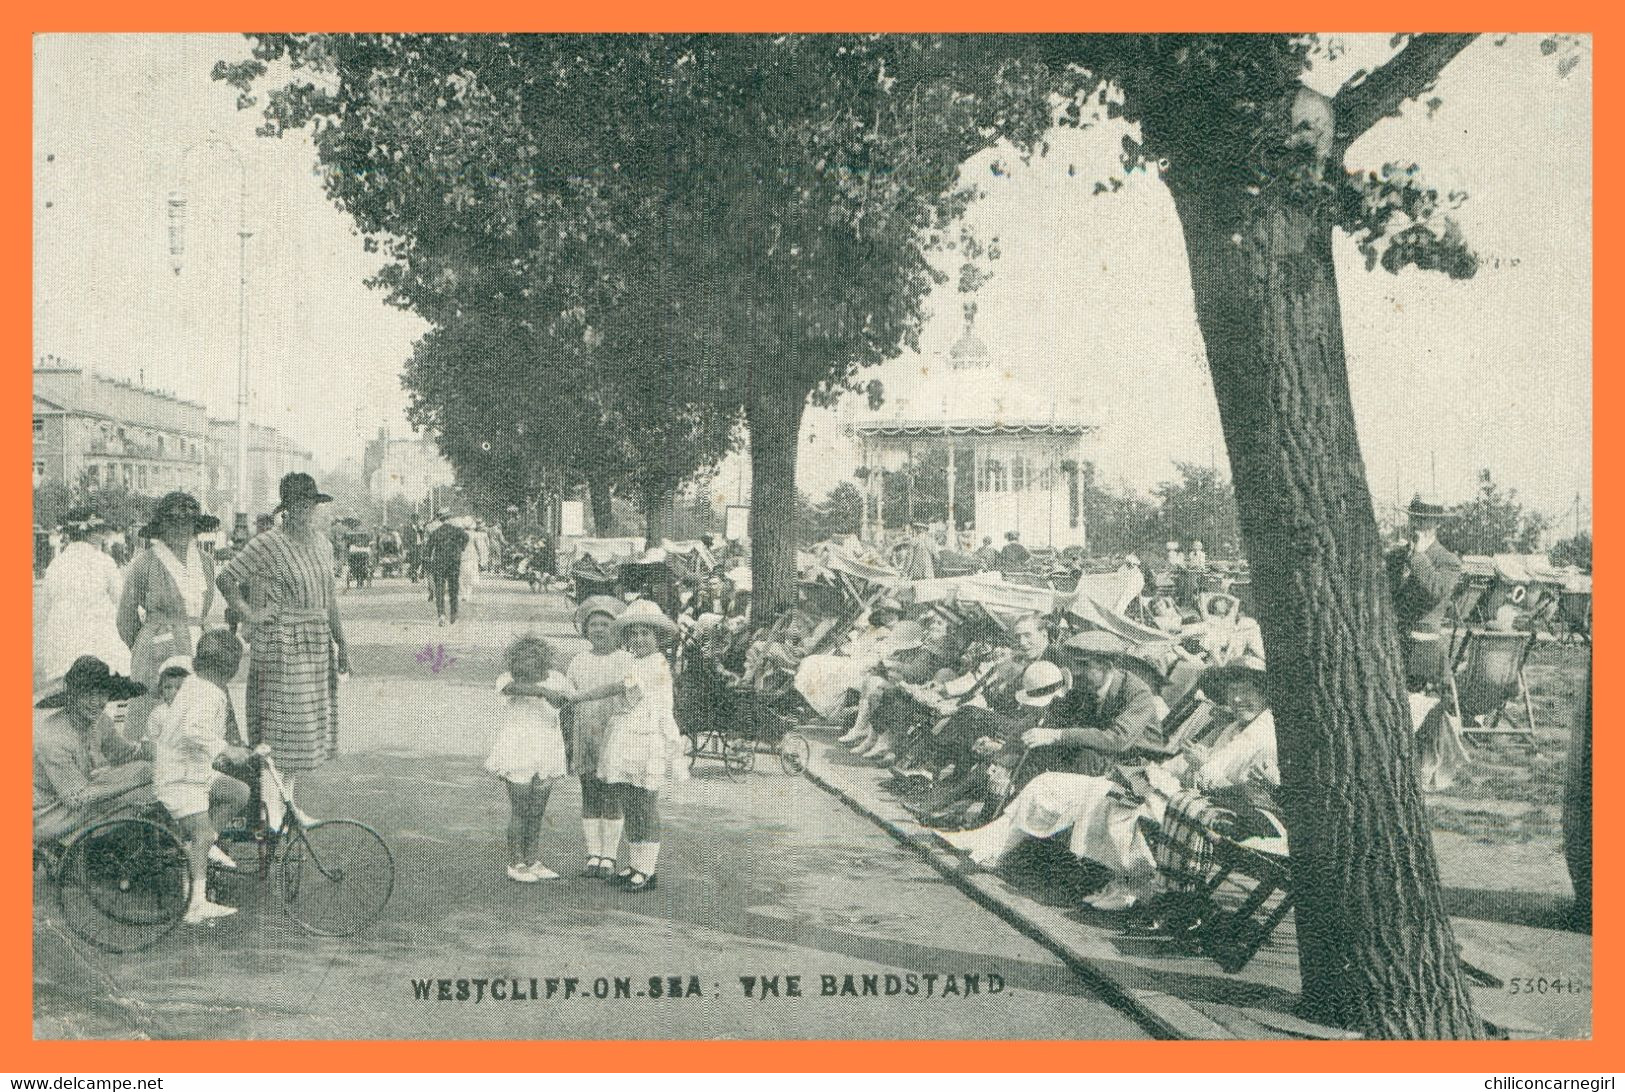 WESTCLIFF ON SEA - The Bandstand - Tricycle - Animée - Edit. GRANO - 1923 - Southend, Westcliff & Leigh